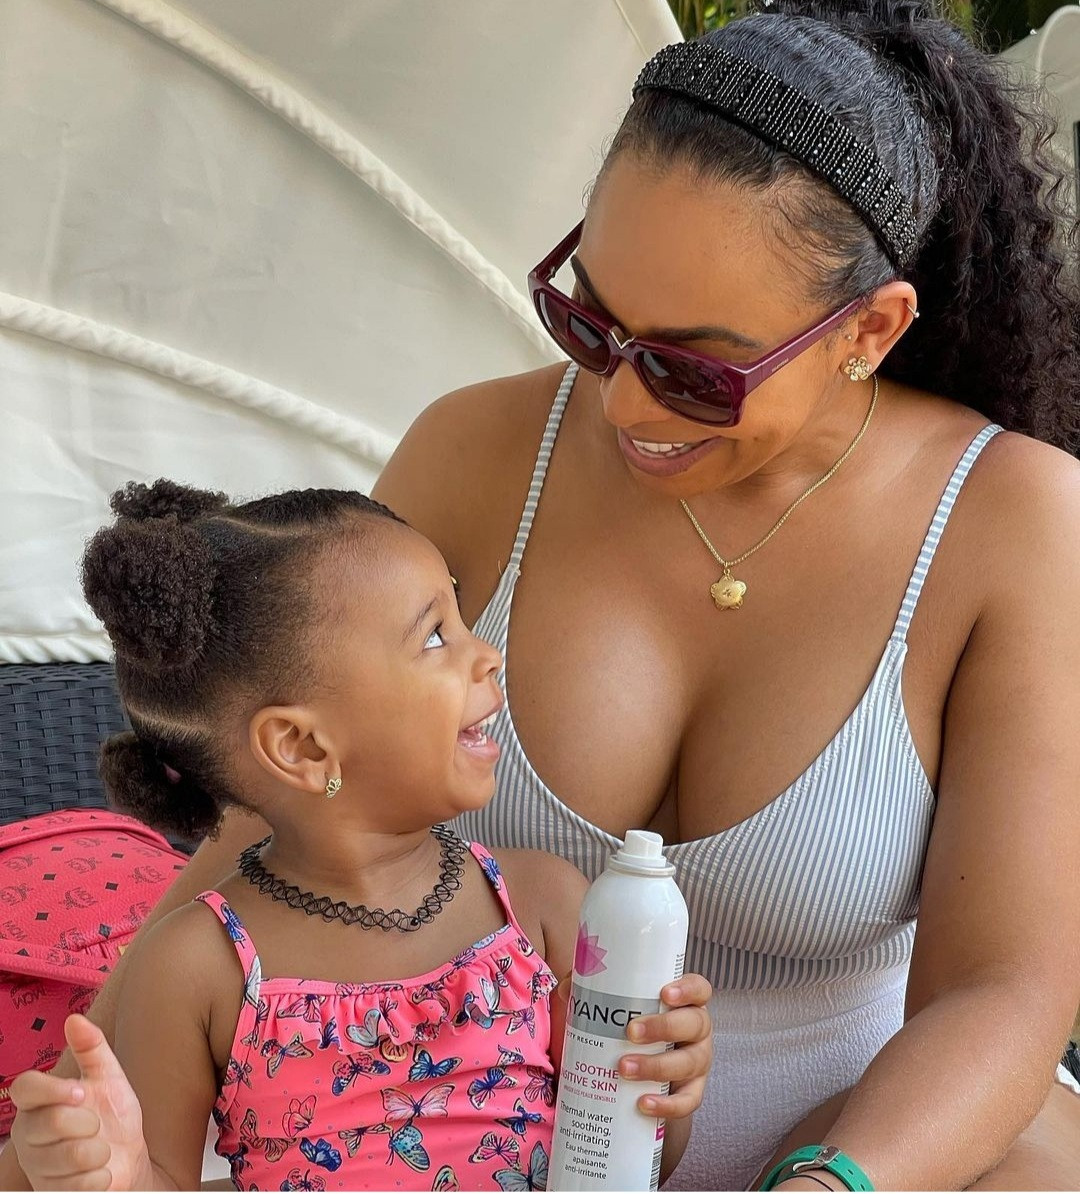 TBoss responds to inquiry about her daughter